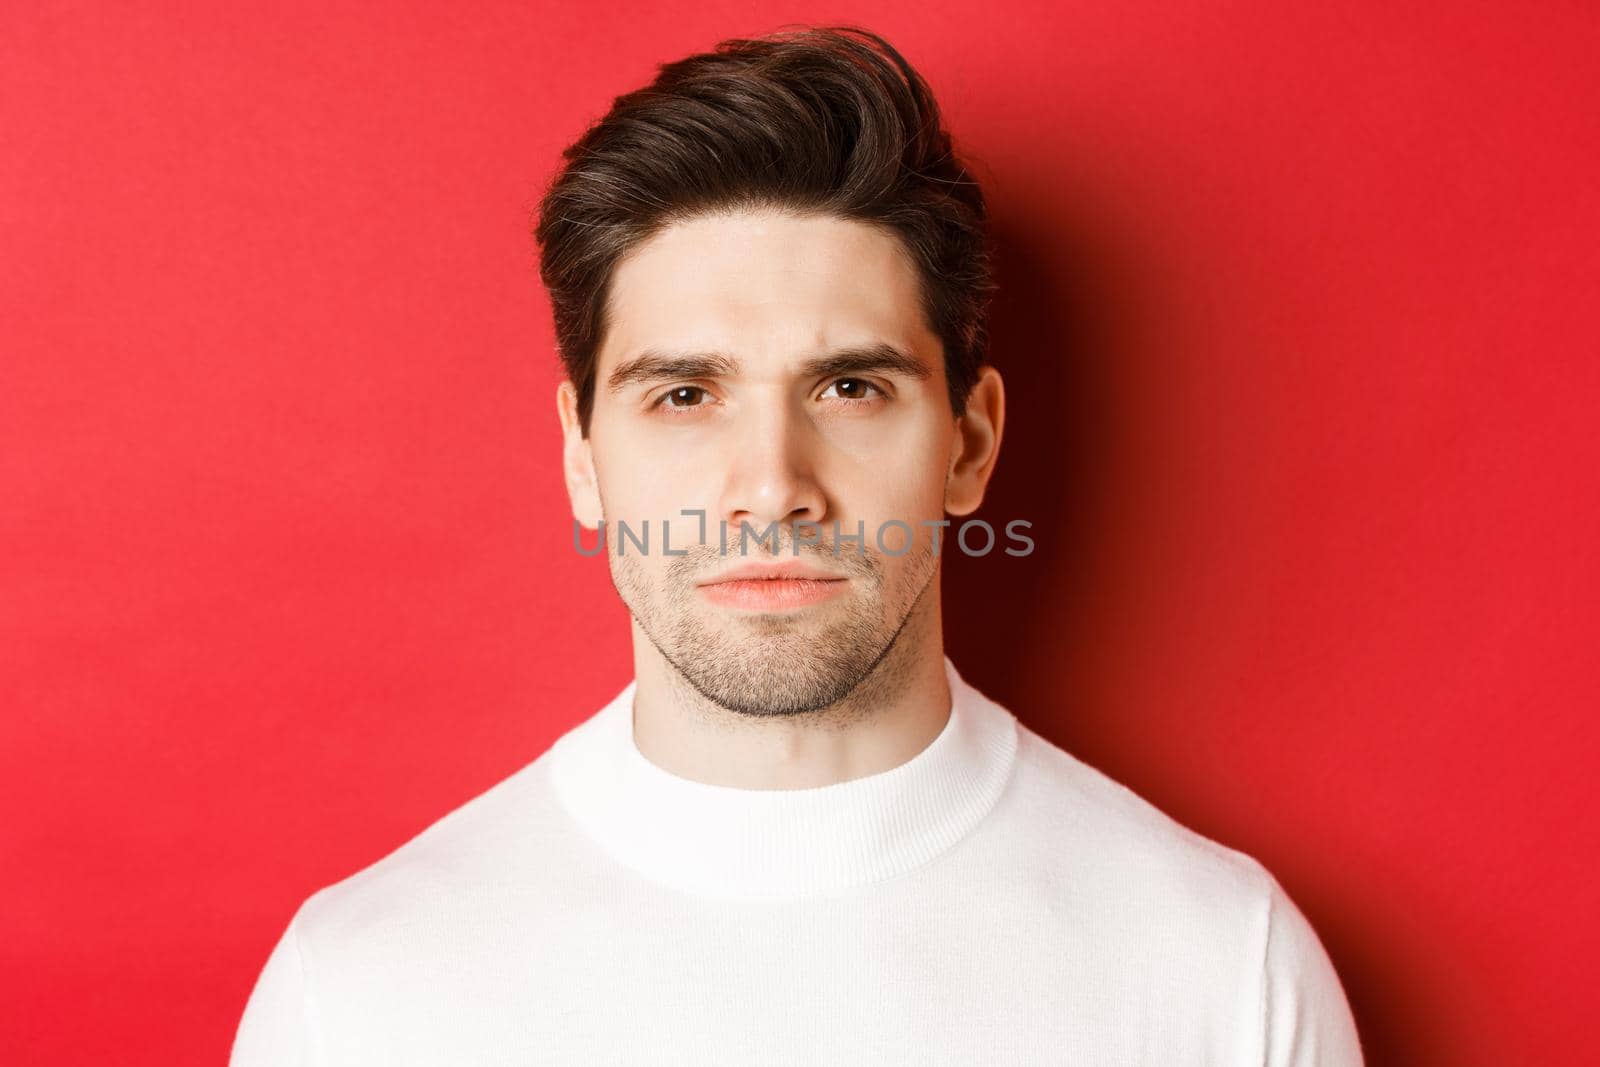 Close-up of thoughtful, serious-looking man in white sweater, standing over red background.